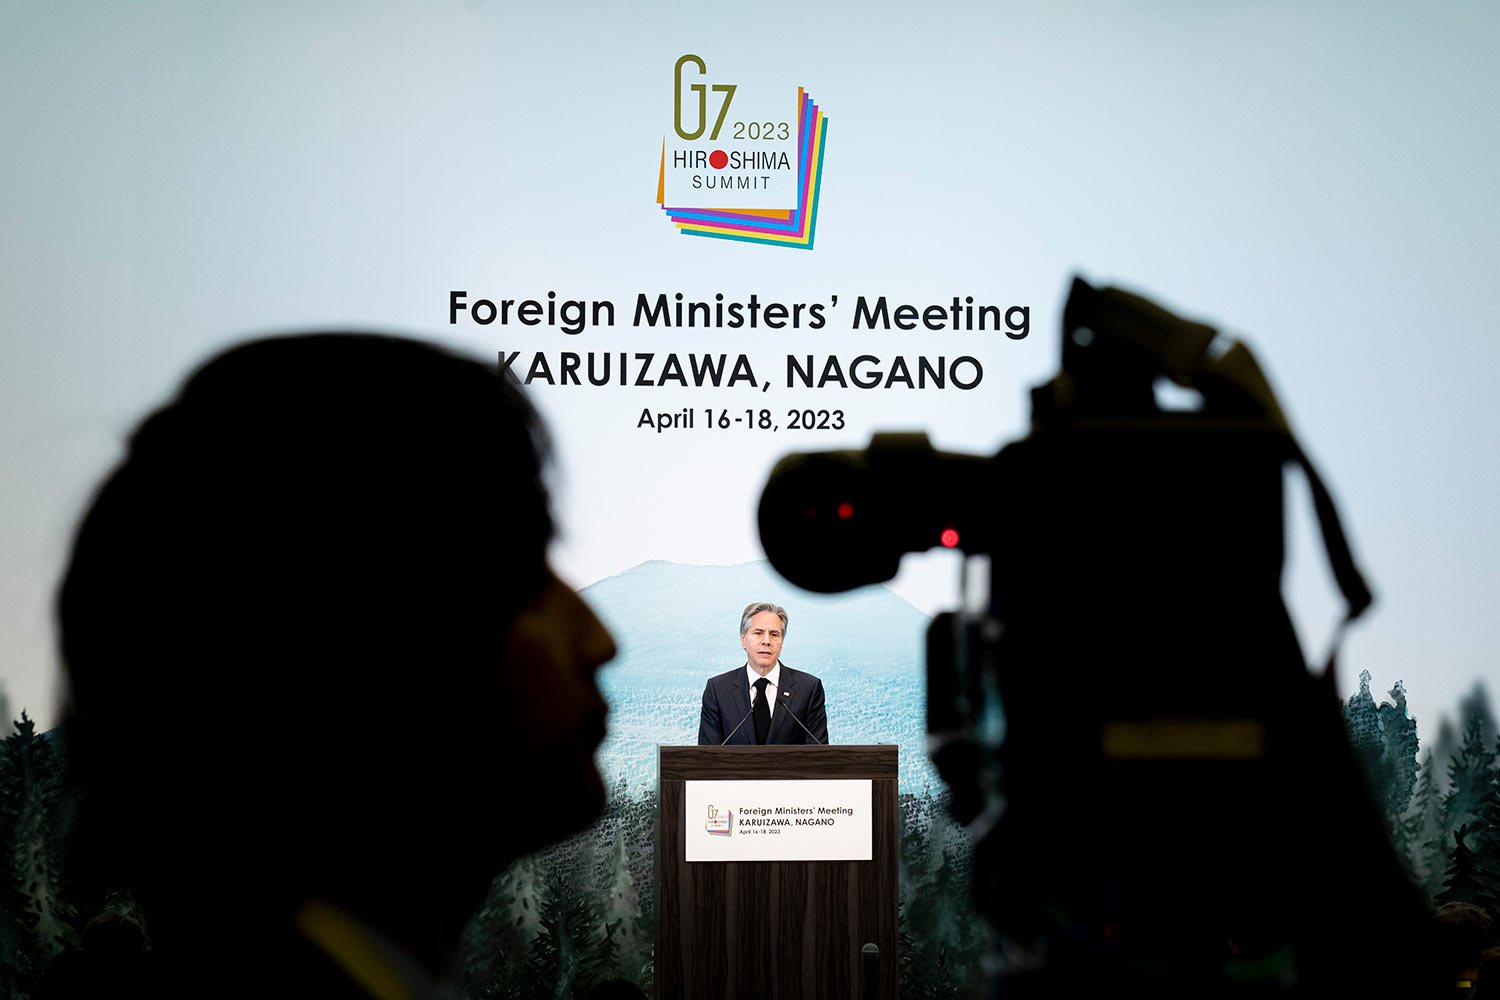  U.S. Secretary of State Antony Blinken speaks during a news conference at the conclusion of a G7 Foreign Ministers' Meeting at The Prince Karuizawa hotel in Karuizawa, Japan, Tuesday, April 18, 2023. (AP Photo/Andrew Harnik, Pool) 